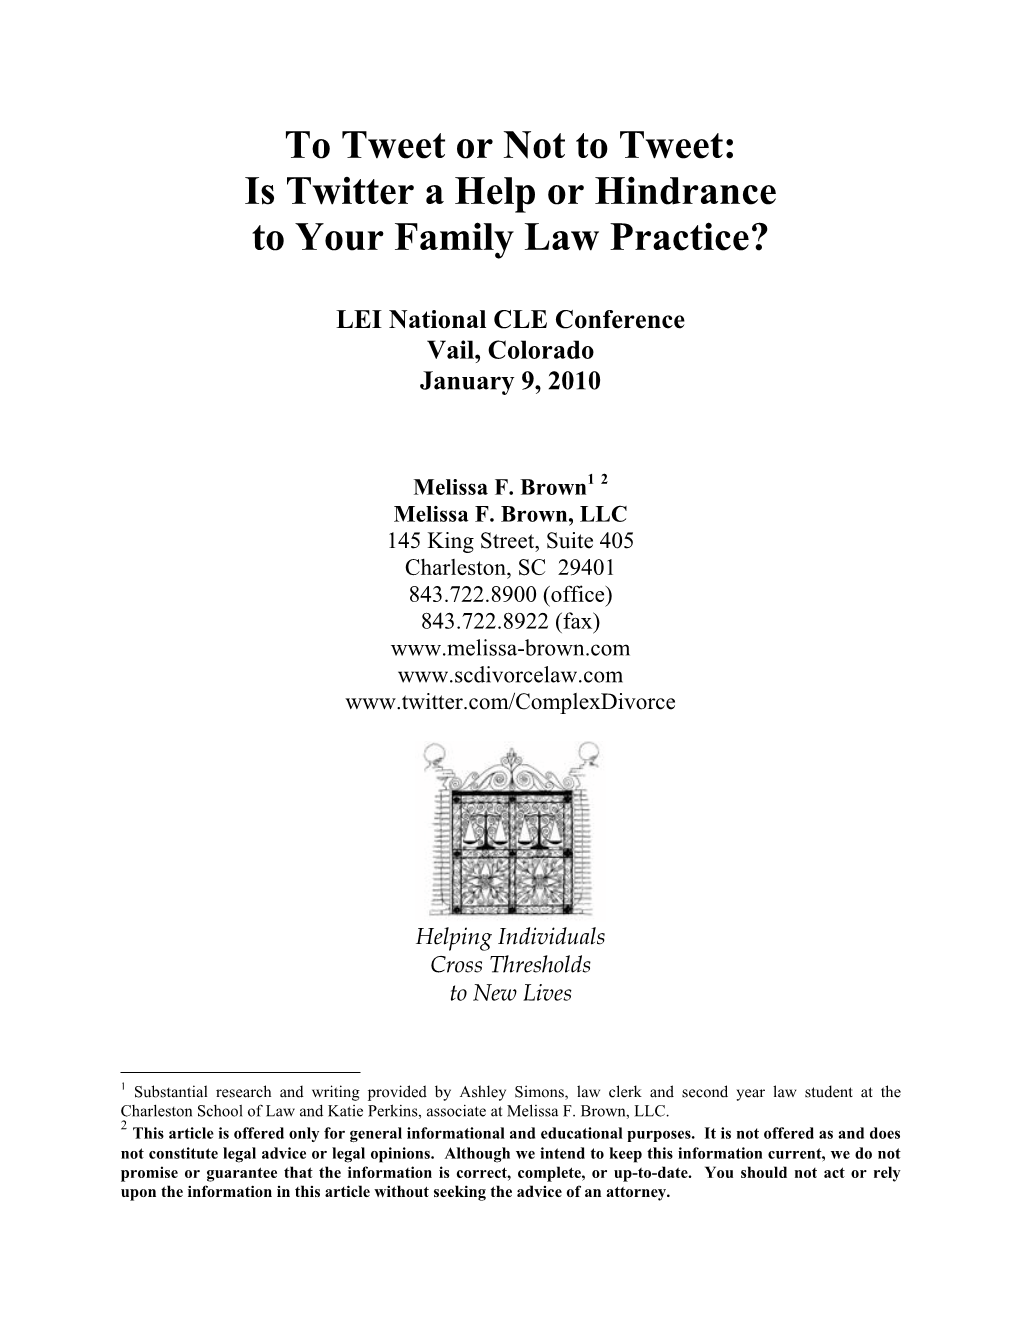 To Tweet Or Not to Tweet: Is Twitter a Help Or Hindrance to Your Family Law Practice?